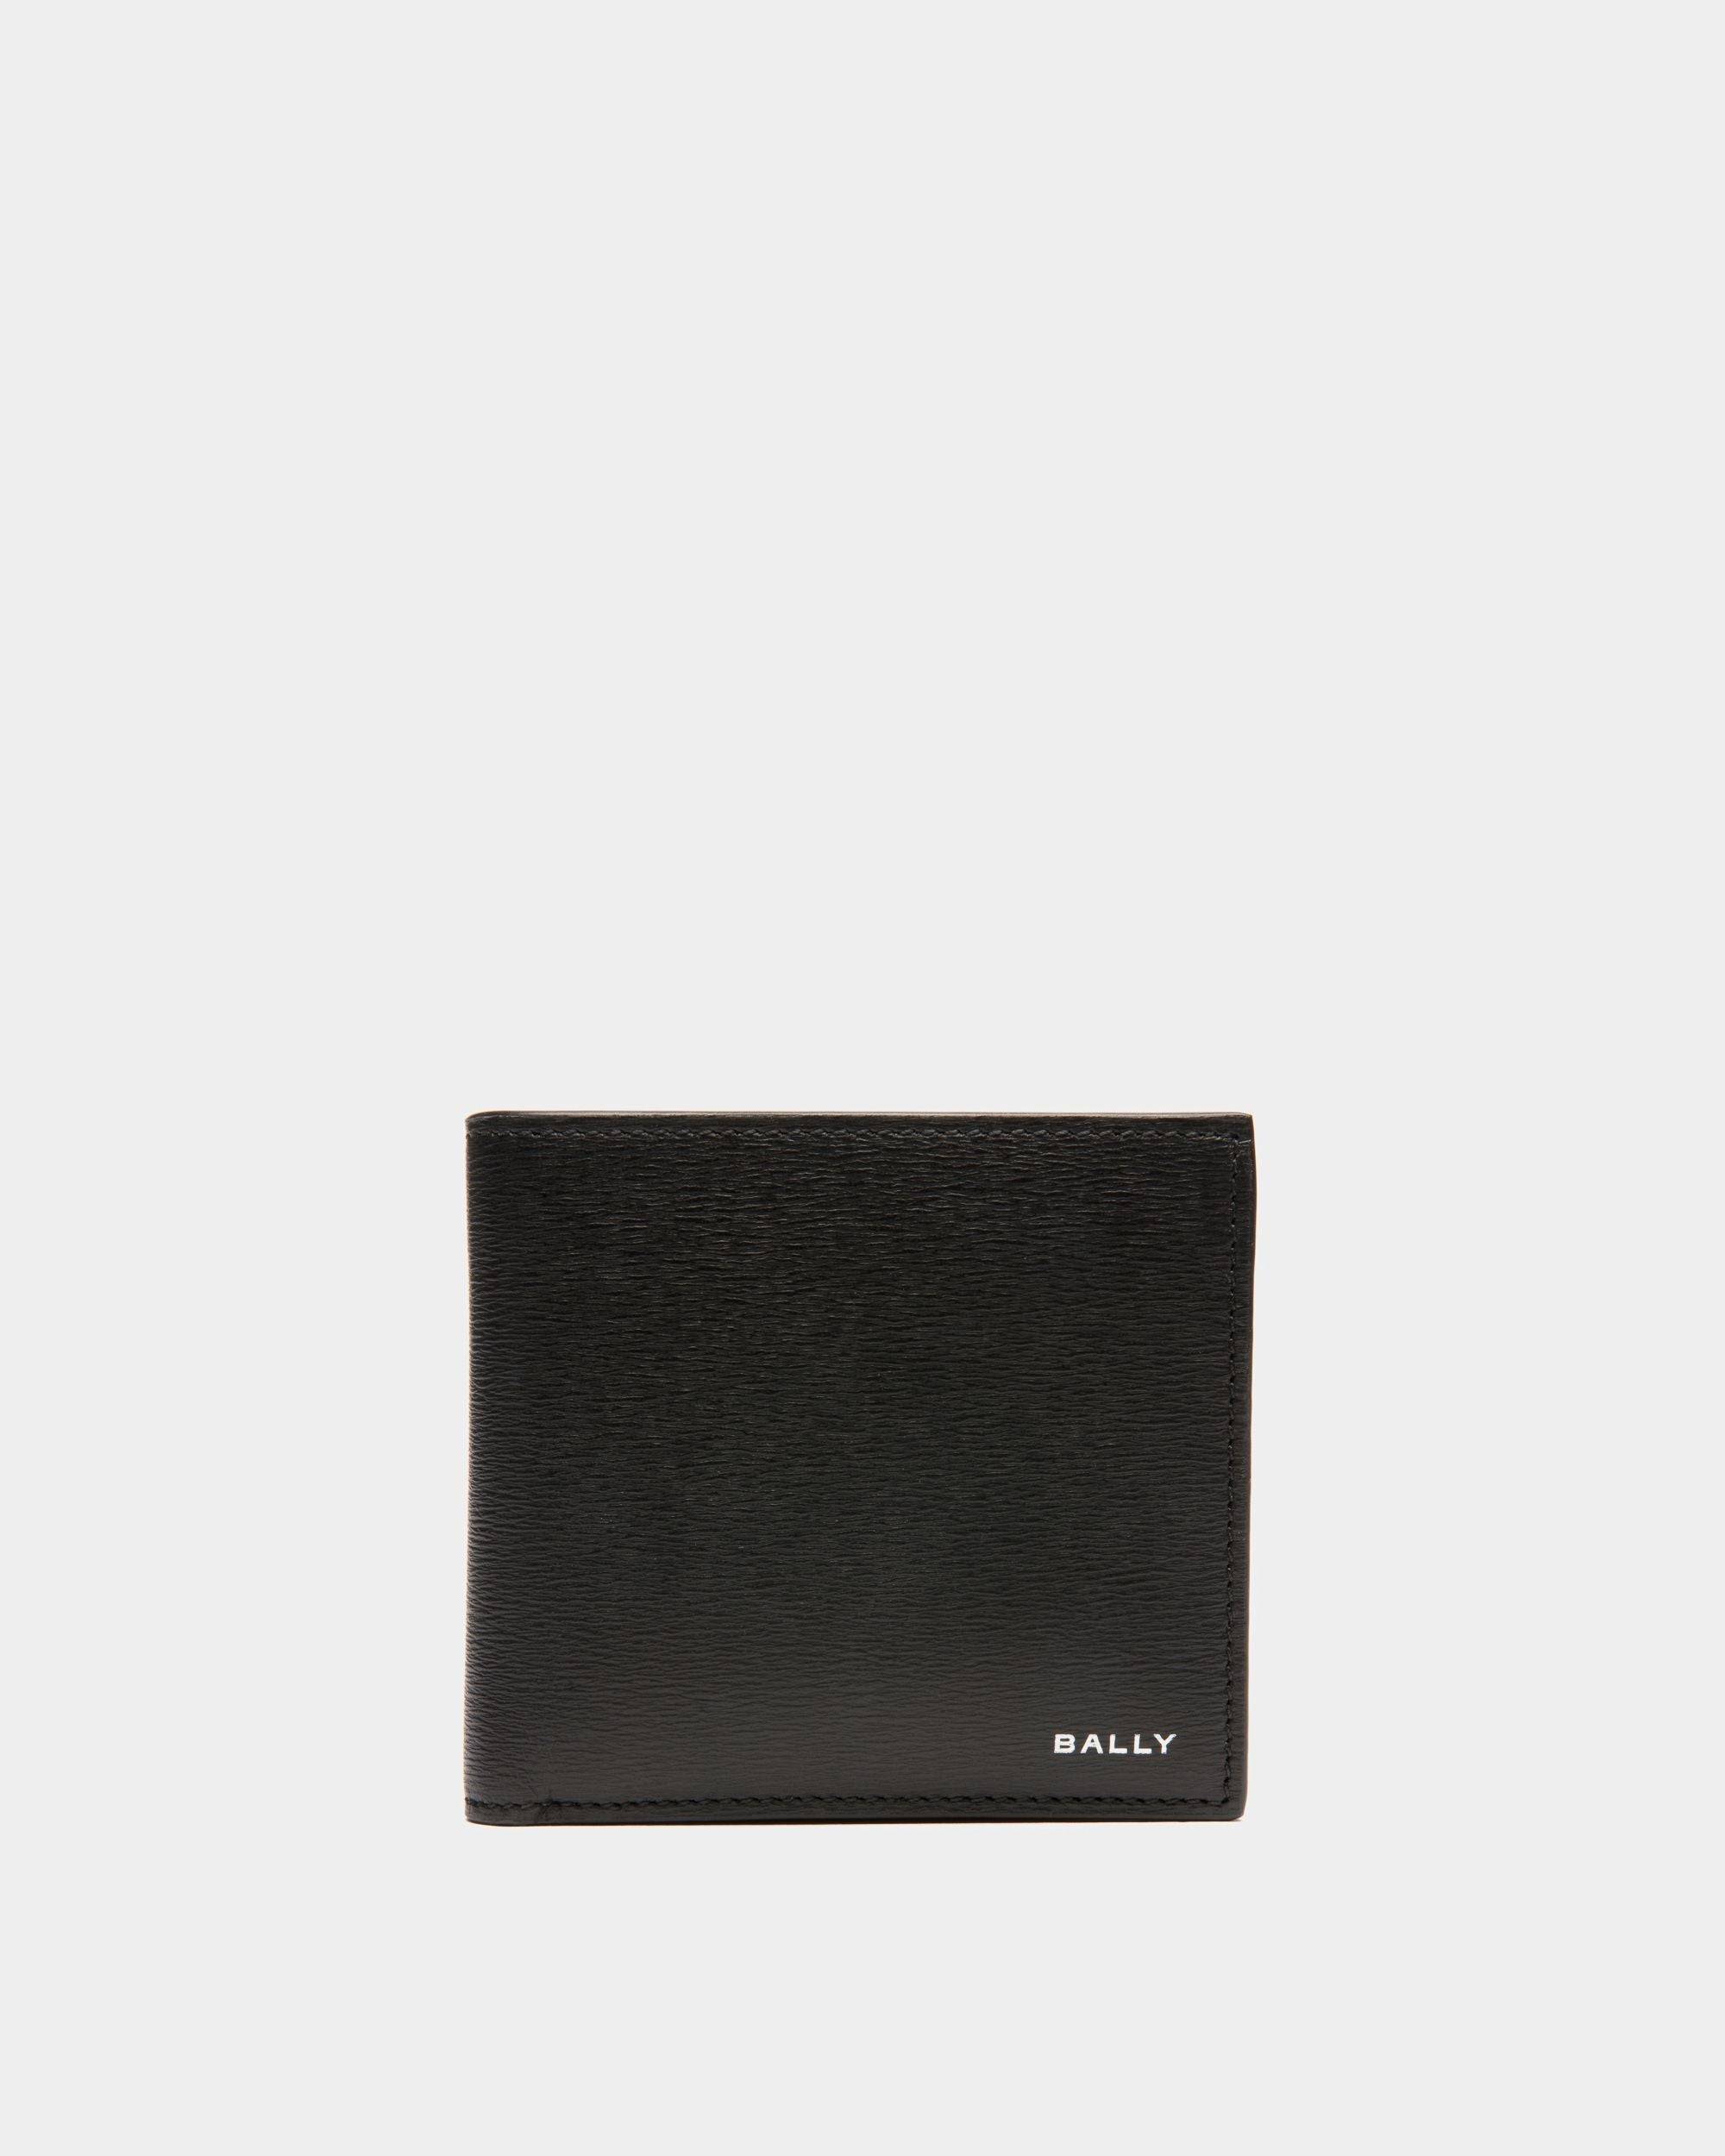 Men's Crossing Bifold Wallet in Leather | Bally | Still Life Front